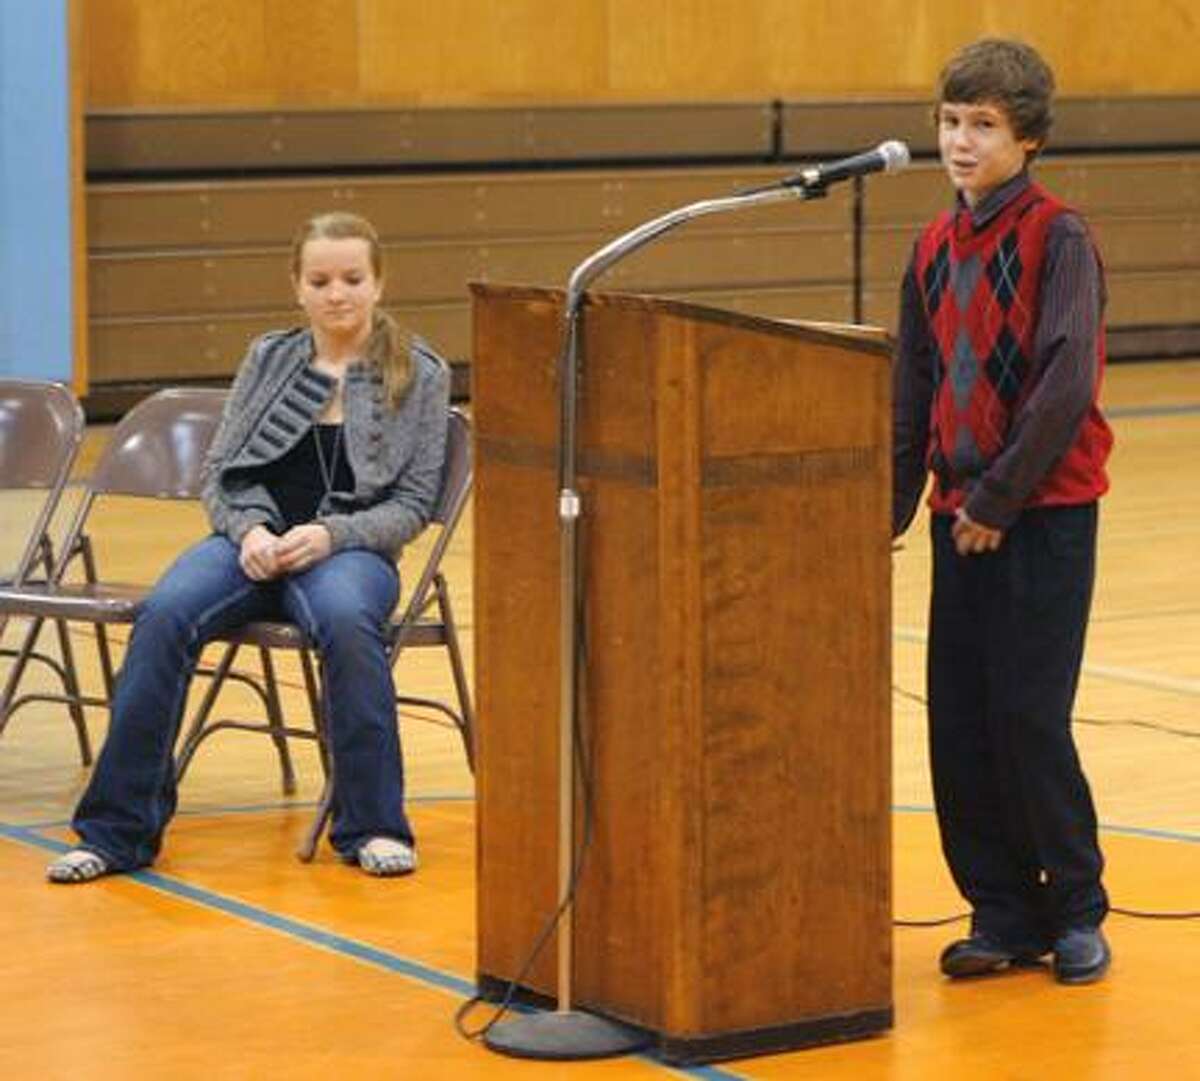 Photo by JOHN HAEGER (Twitter.com/OneidaPhoto) Otto Shortell Middle School seventh grader Tanner Williams reacts after winning the annual Oneida City School District 2011 Spelling Bee on Tuesday, Nov. 29, 2011 held at the school in Wampsville. Looking on in the background is second place finisher Jadah Gann.